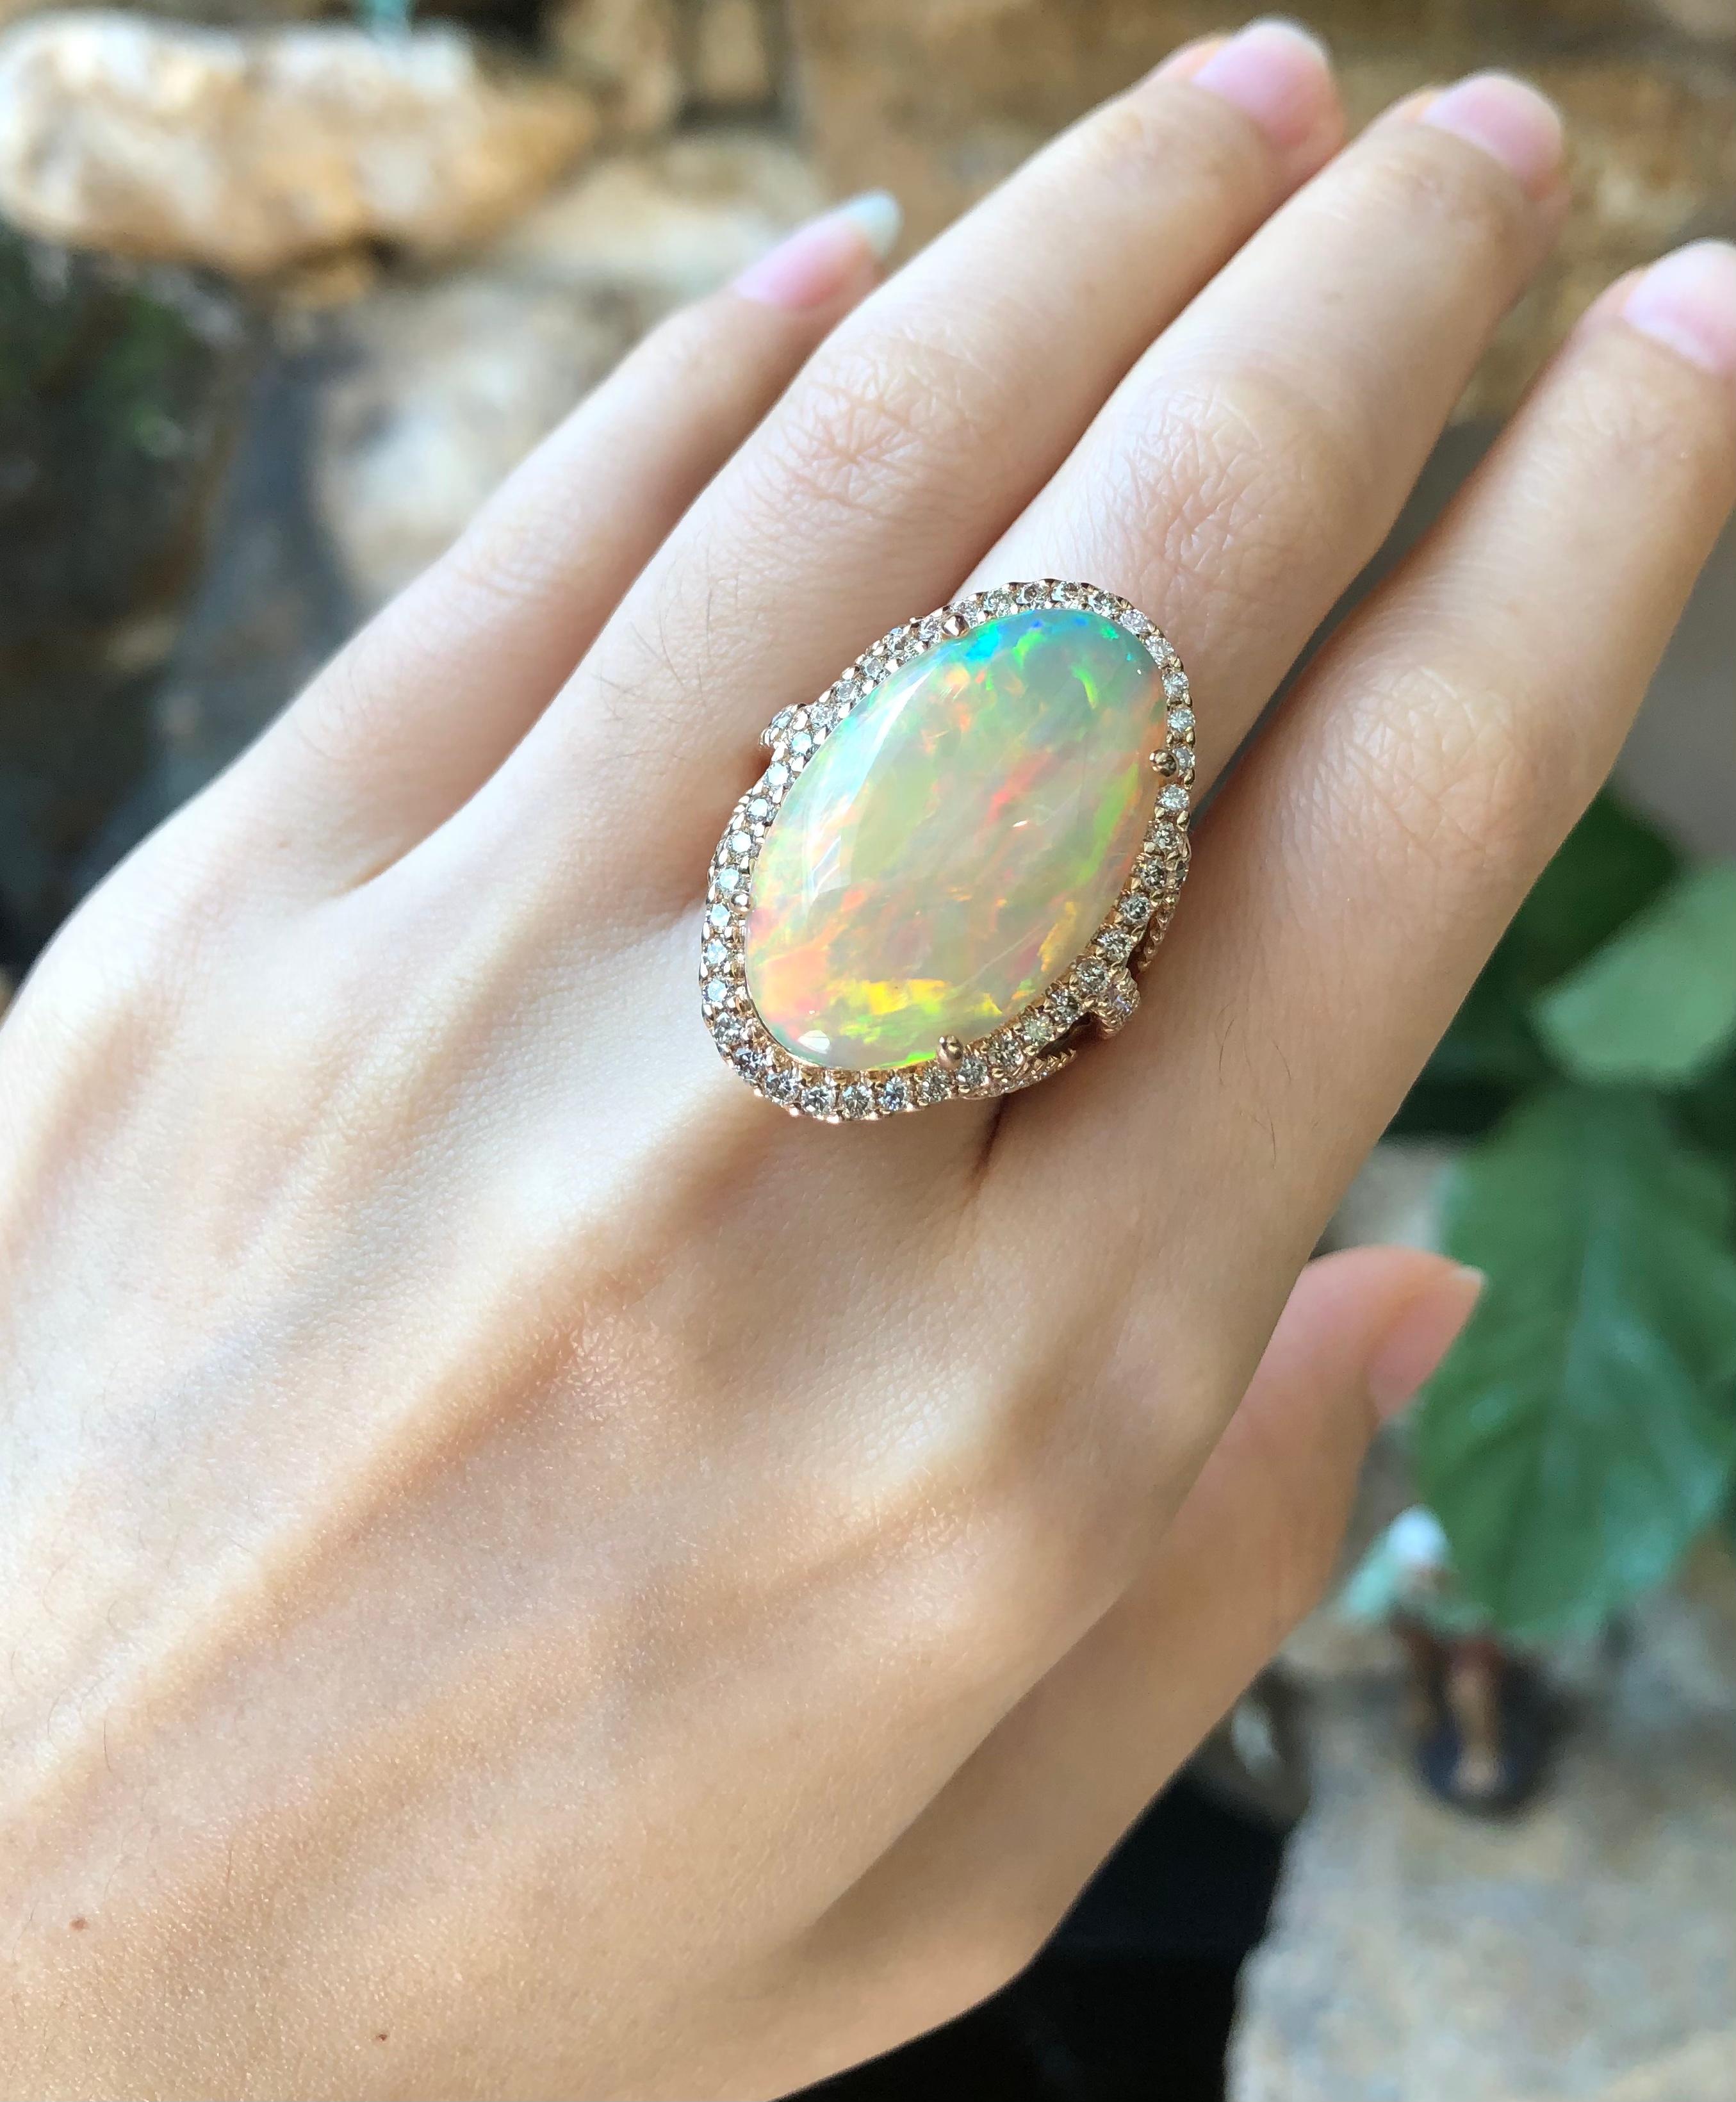 Opal 10.68 carats with Brown Diamond 1.46 carats Ring set in 18 Karat Rose Gold Settings

Width:  2.2 cm 
Length: 3.0 cm
Ring Size: 54
Total Weight: 17.59 grams

